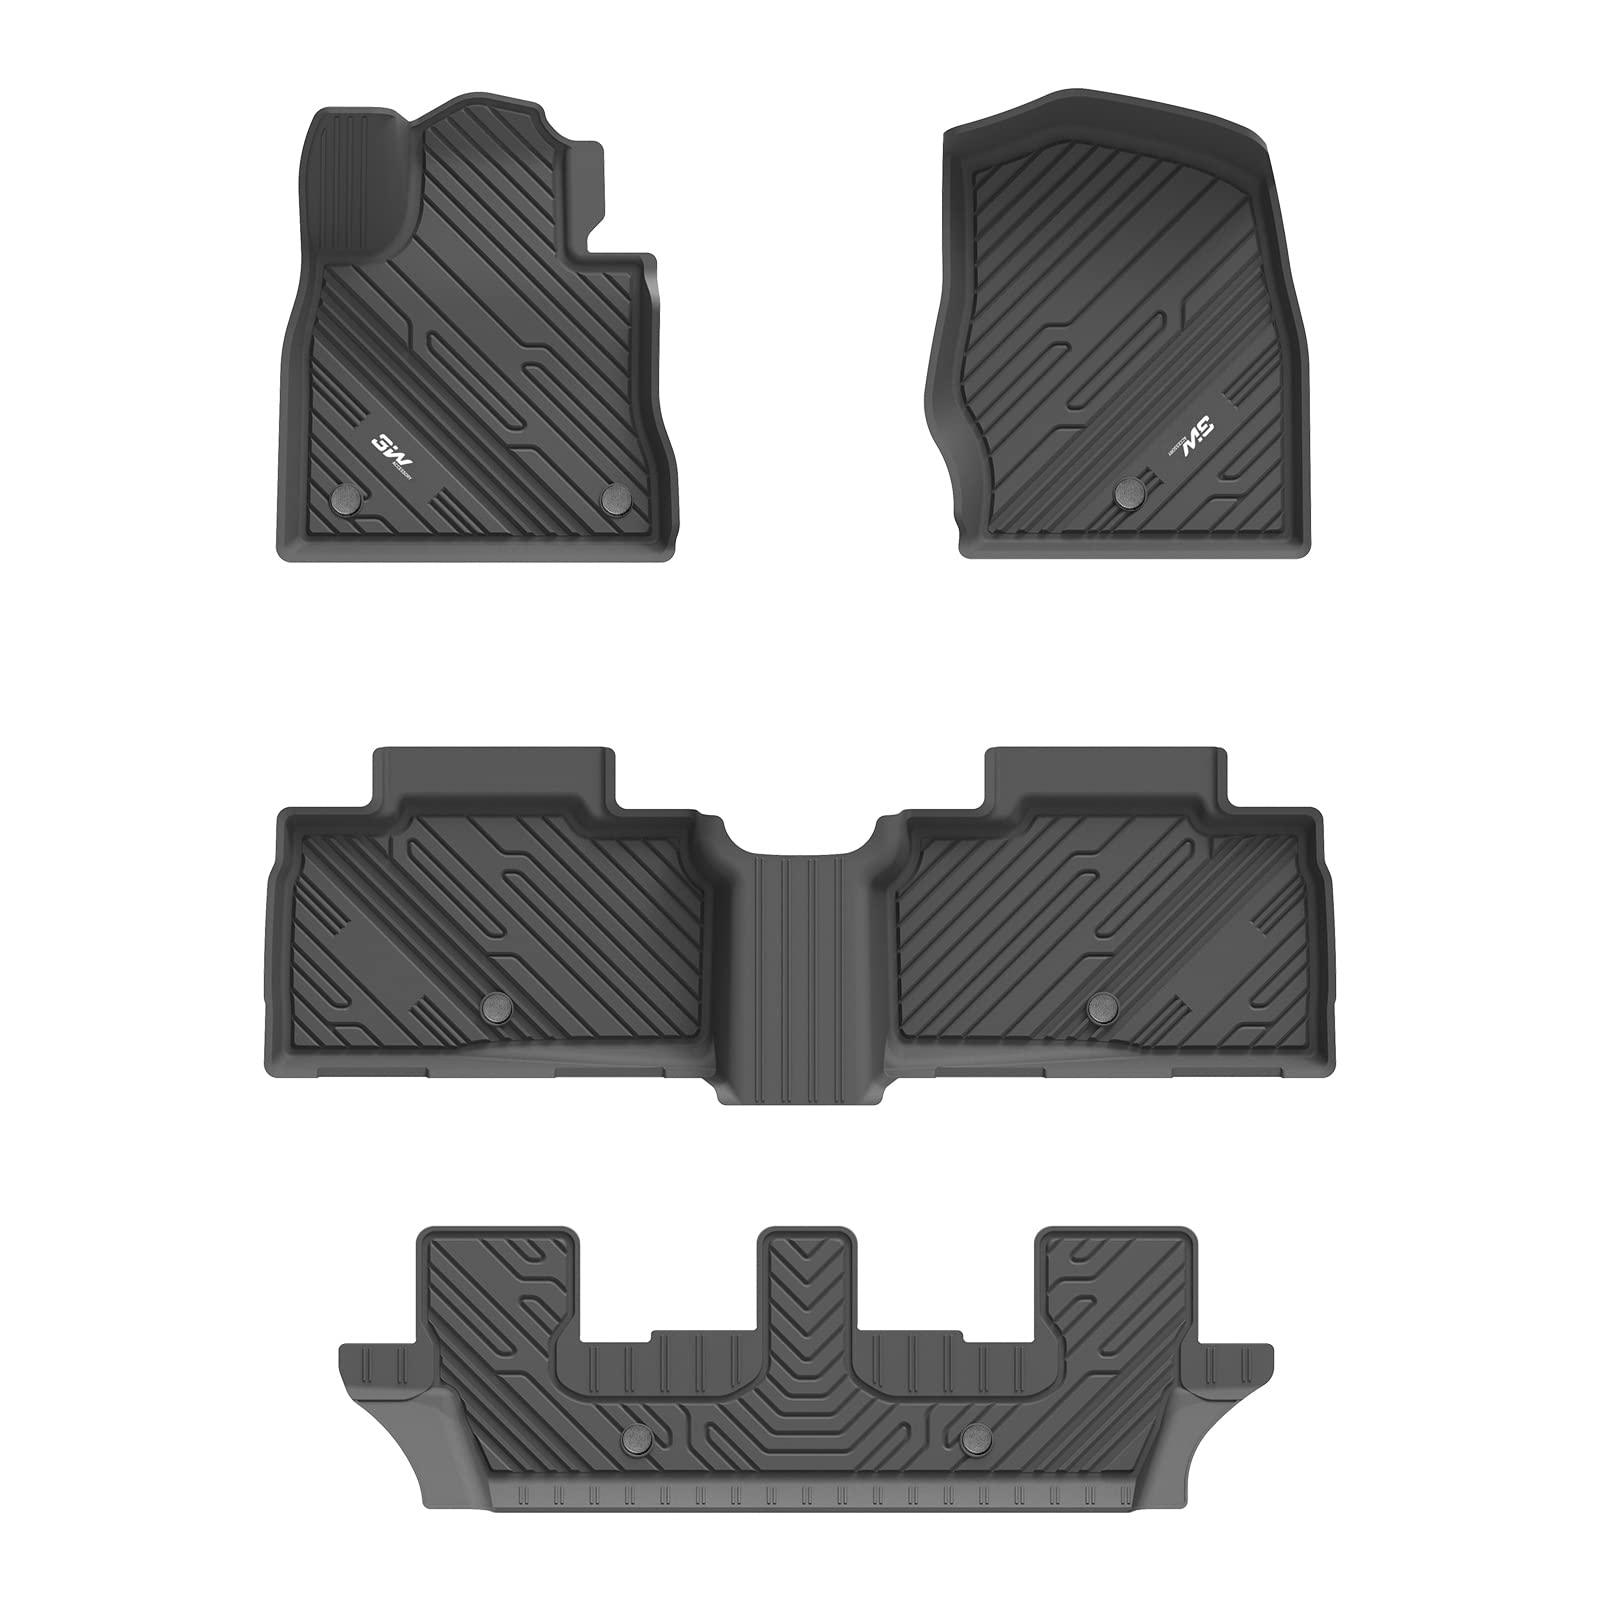 3W Ford Explorer 2020-2024 Custom 7-Seat Floor Mats TPE Material & All-Weather Protection Vehicles & Parts 3Wliners 2020-2024 7 Seat Explorer 2020-2024 1st&2nd&3rd Row Mats